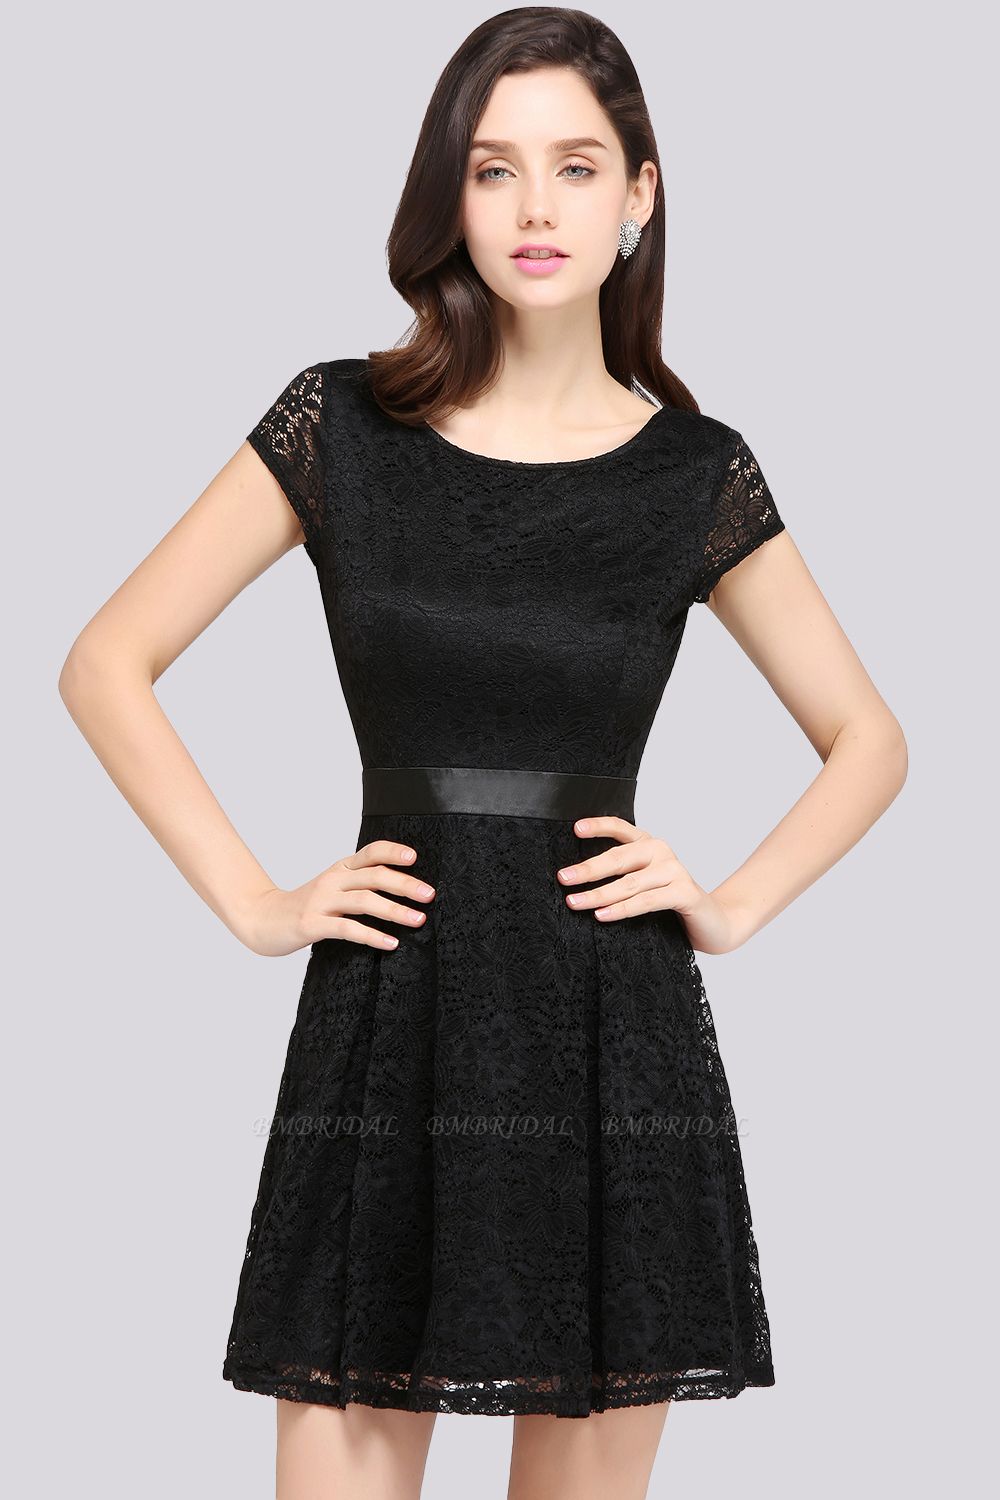 BMbridal Affordable Black Lace Short-Sleeves Junior Bridesmaid Dresses In Stock